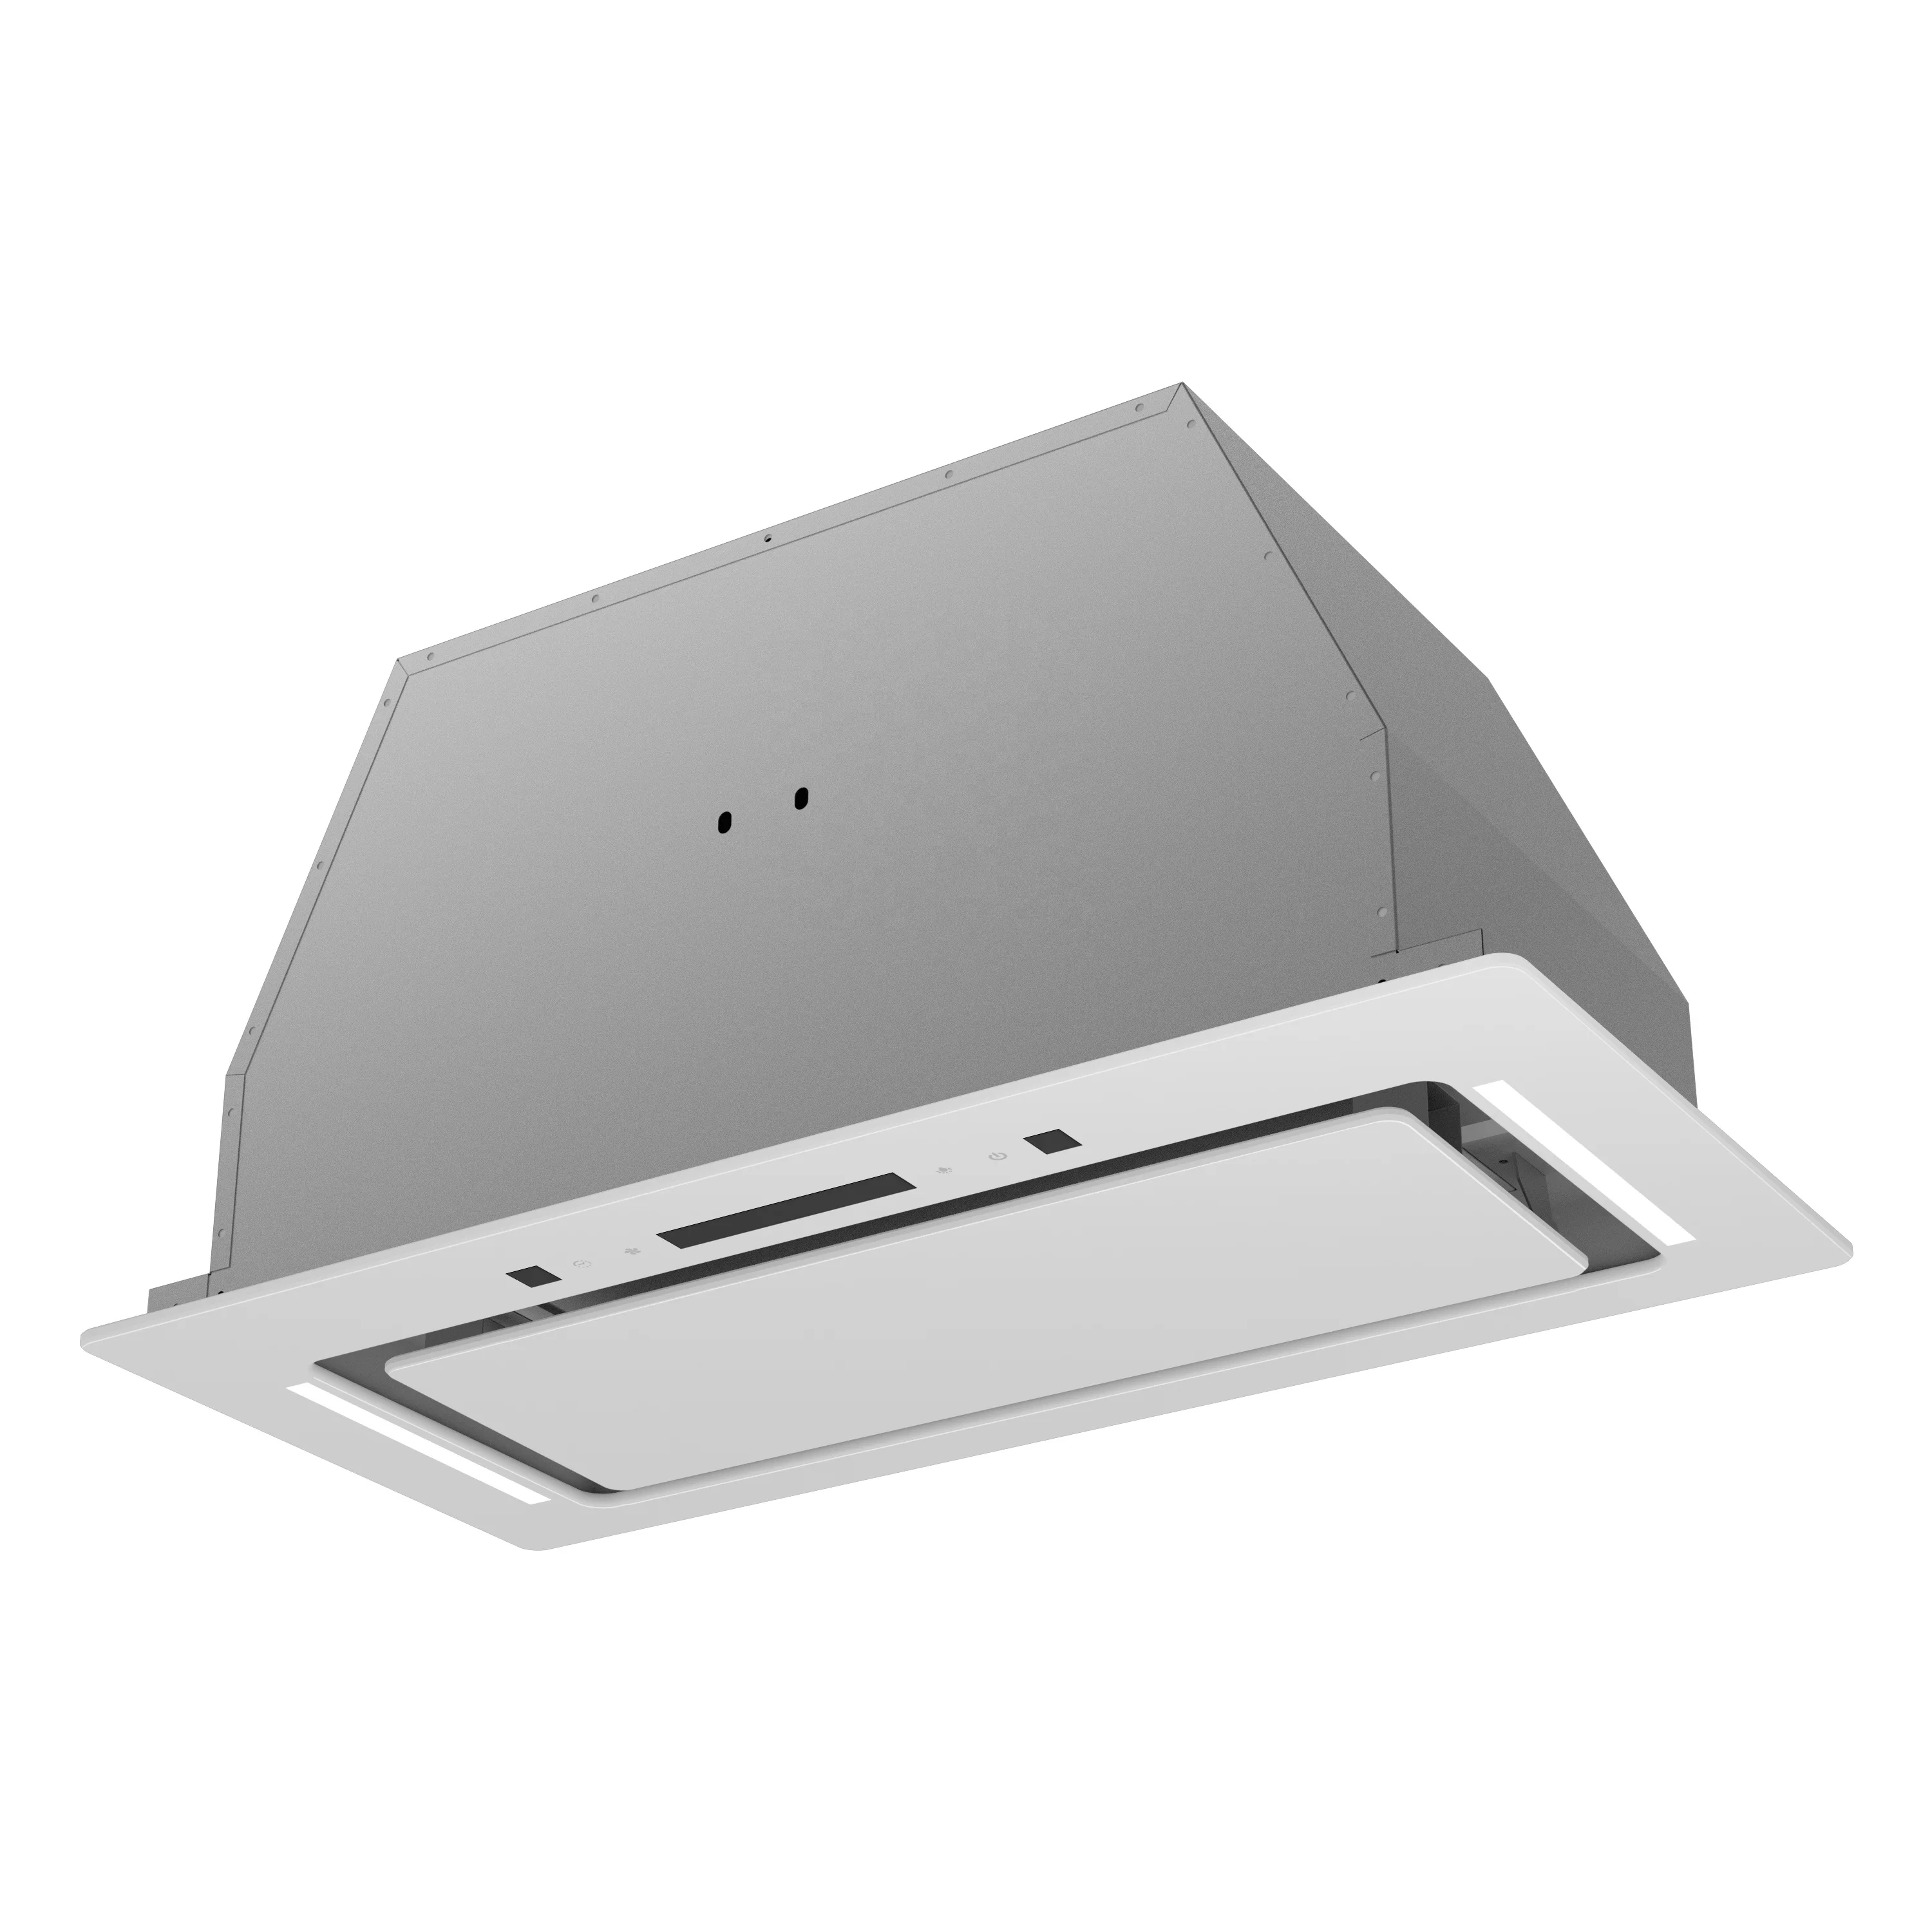 Built-In CB CE Certifications Led Lights Convertible Ducted Ductless Insert Hidden Kitchen Vent Range Hood